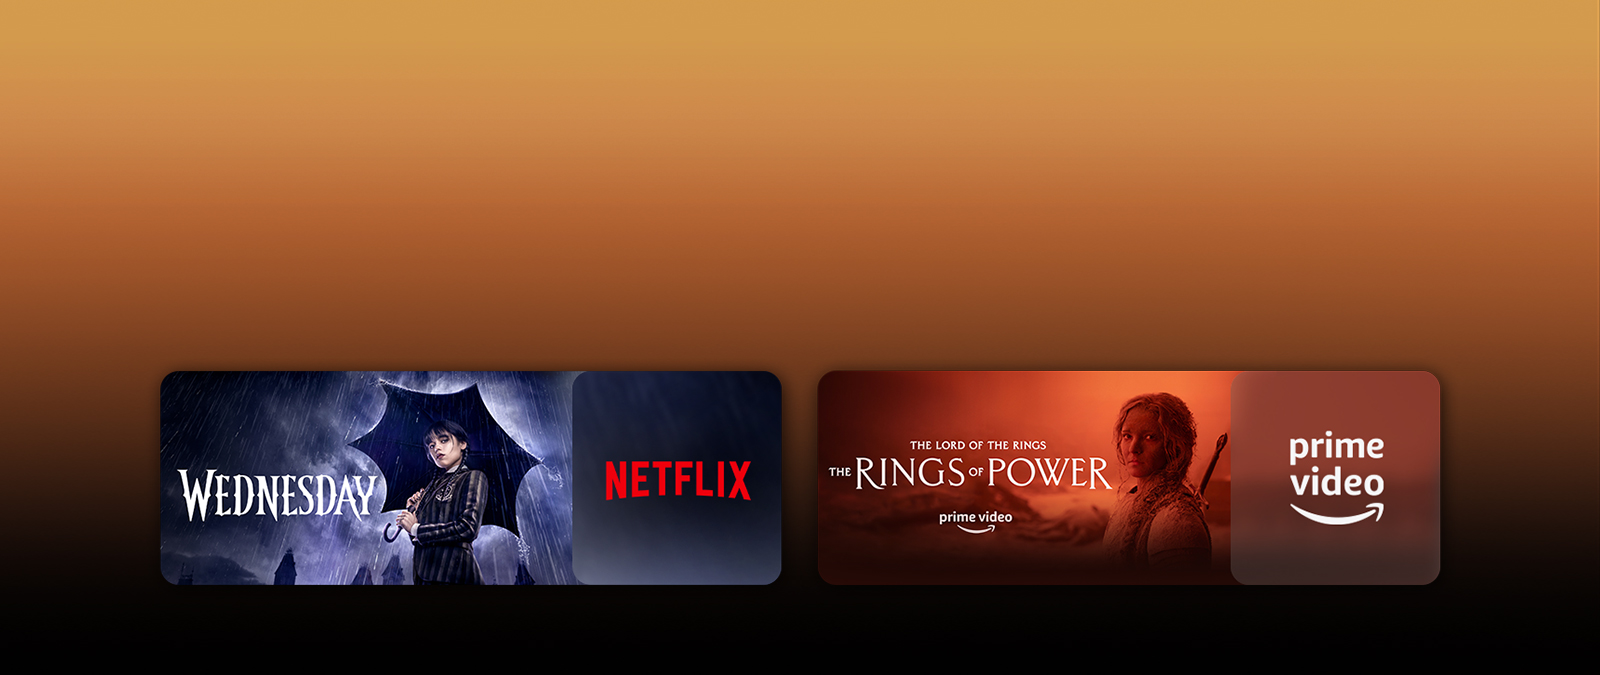 Streaming service logos are shown with their movies to the right of each logo. Showing images are Netflix's Wednesday and PRIME VIDEO's Rings of Power.